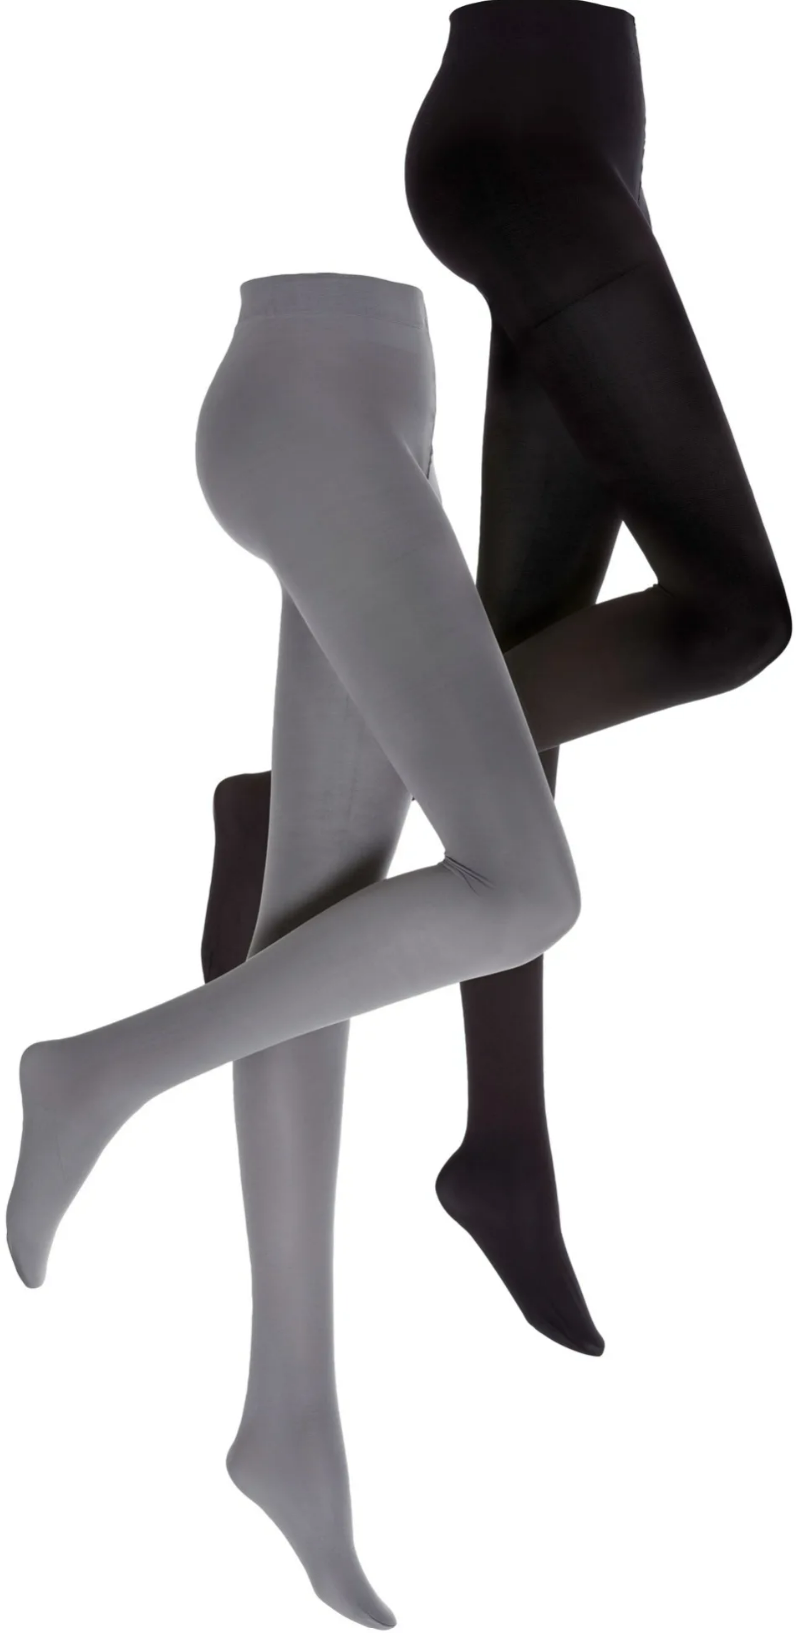 40 denier hipster brief tights, made from regenerated fibres, Eco-friendly,  black, Women's socks